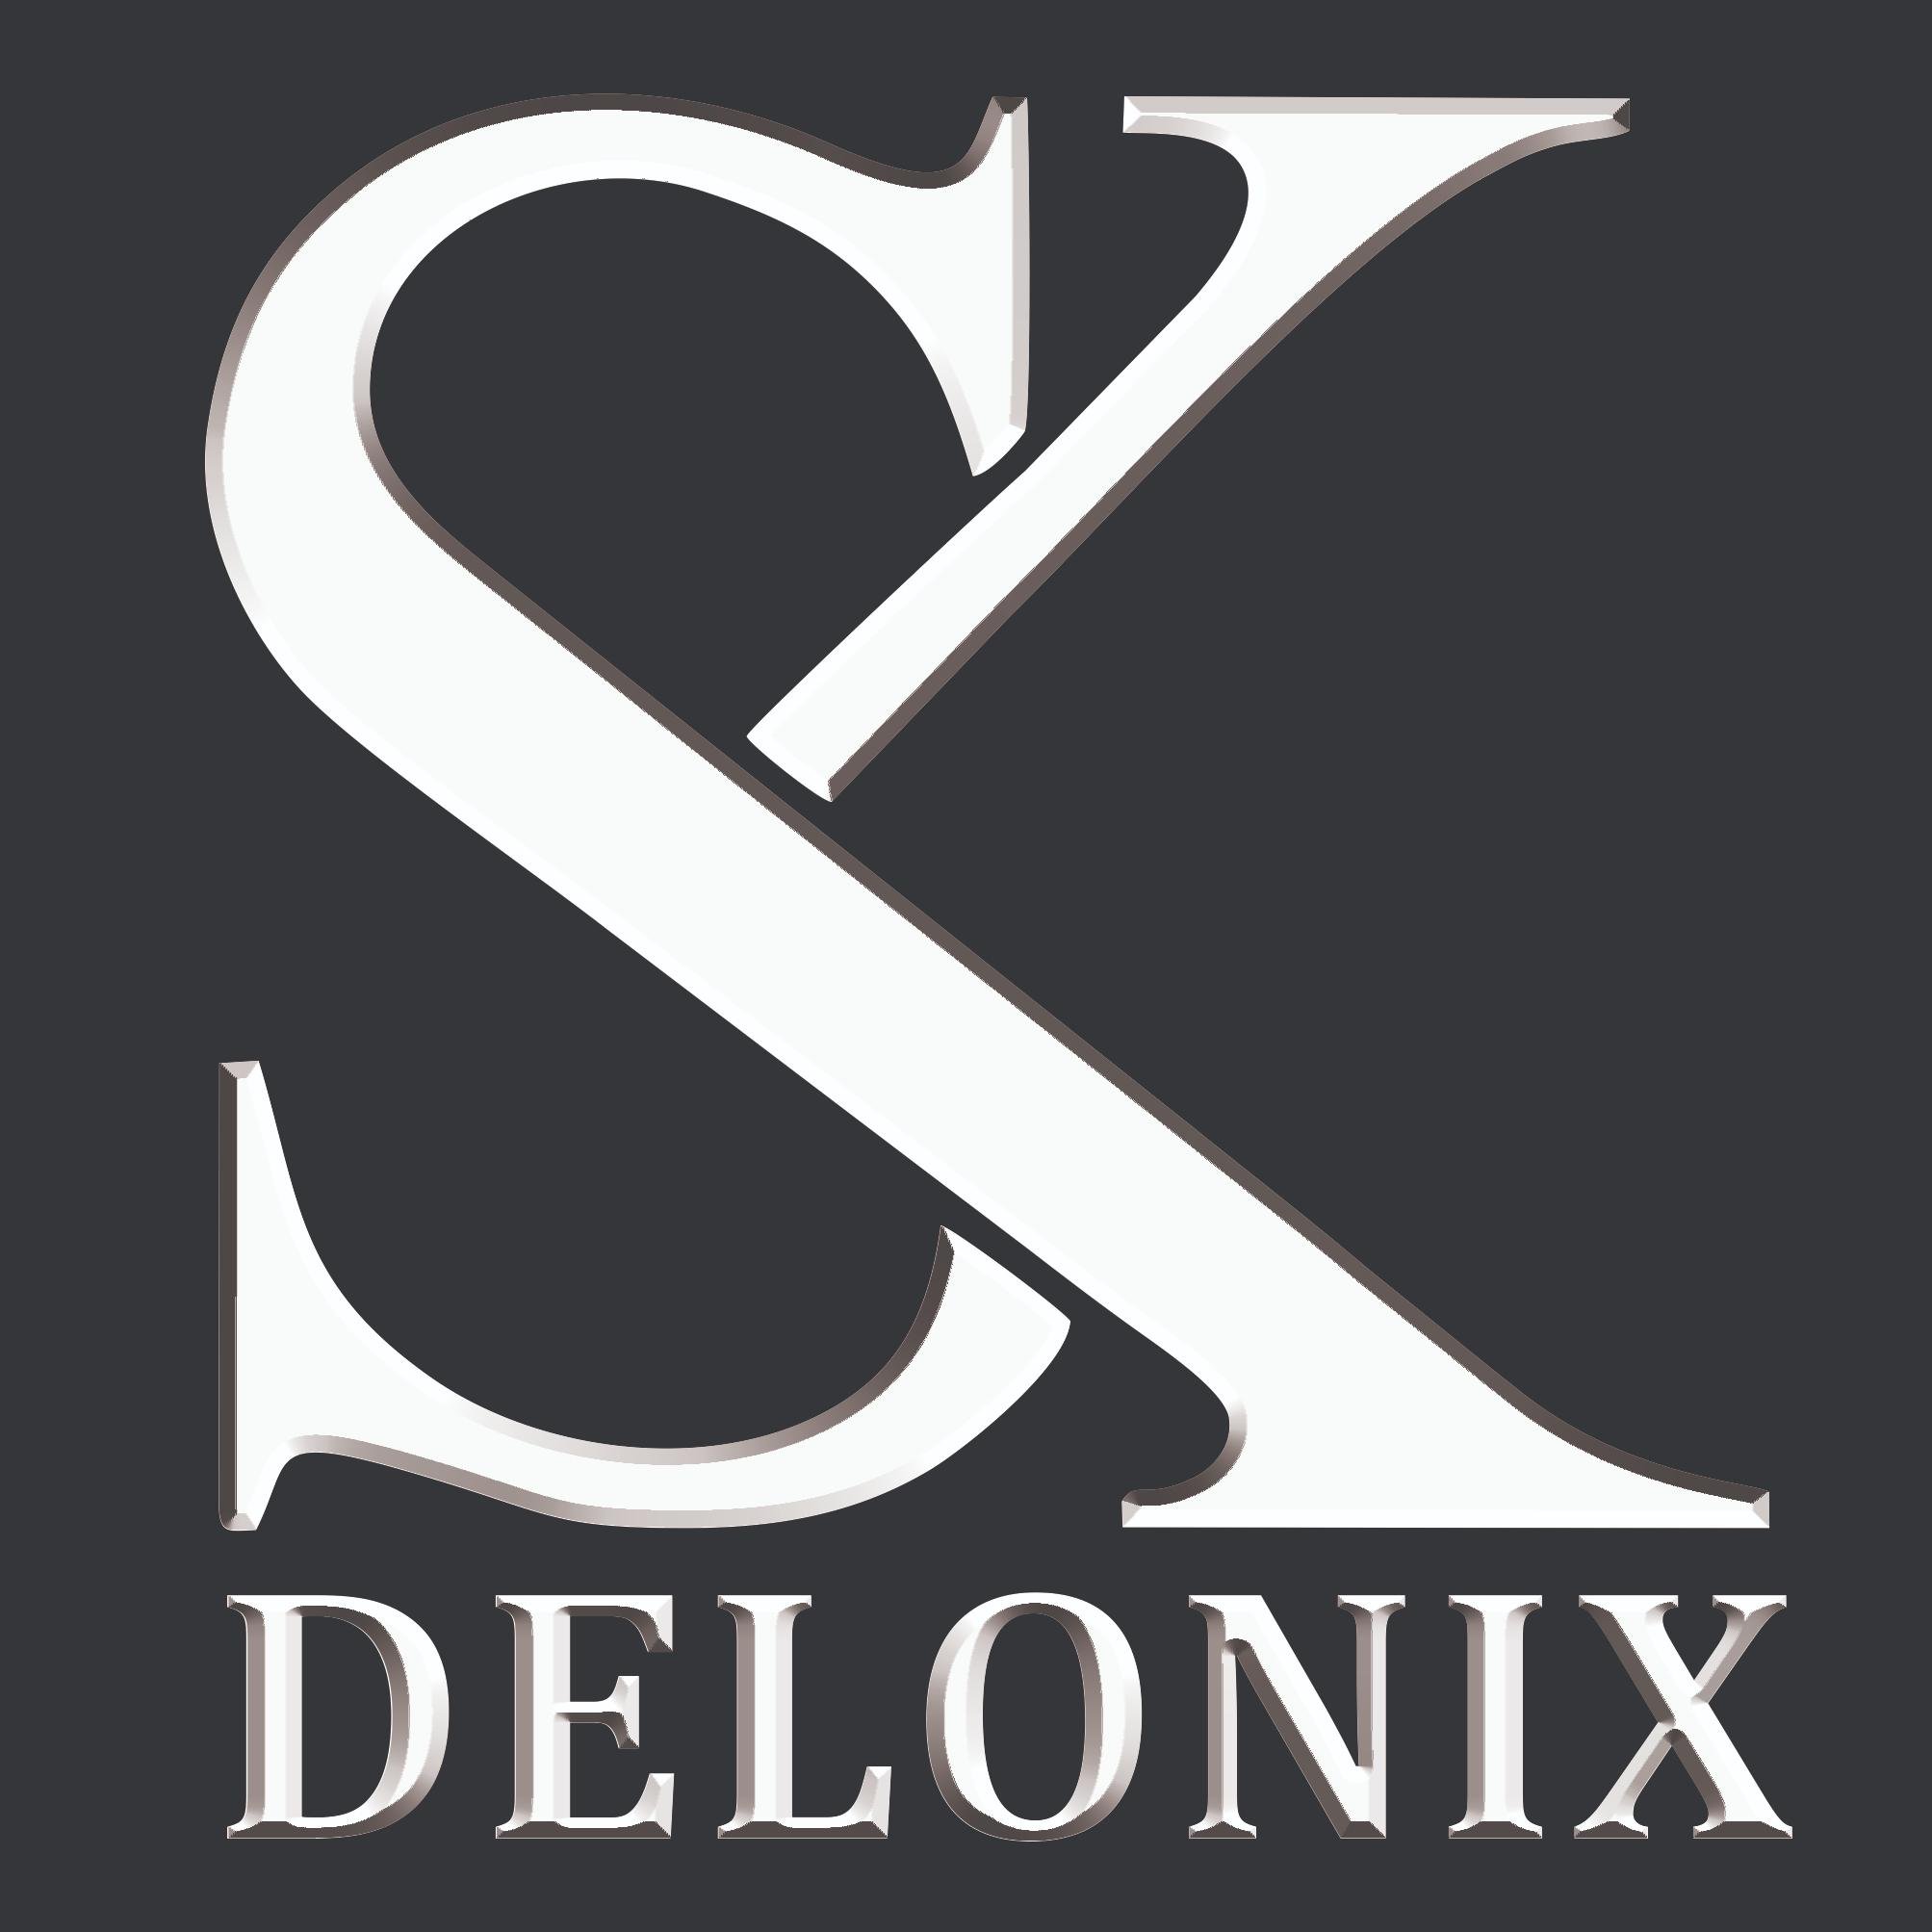 Our Brand Delonix provide superior quality bags and luggage including school, College, travelling, office, laptop, hiking, other backpacks at reasonable prices.